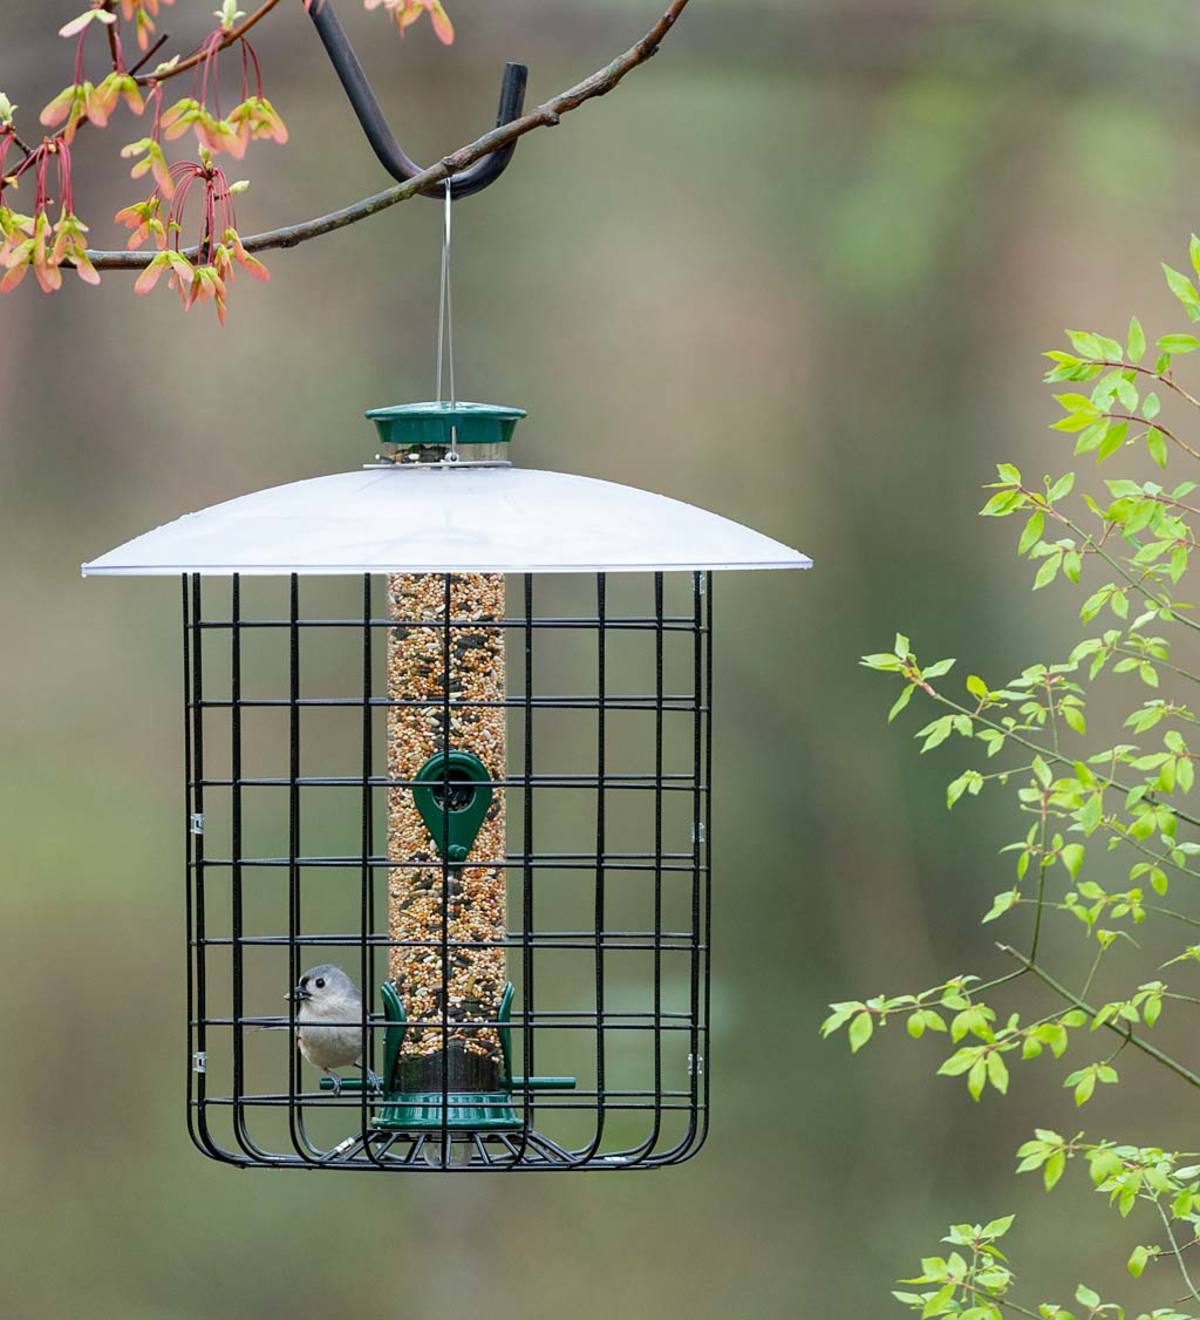 Domed Squirrel-Proof Cage Bird Feeder